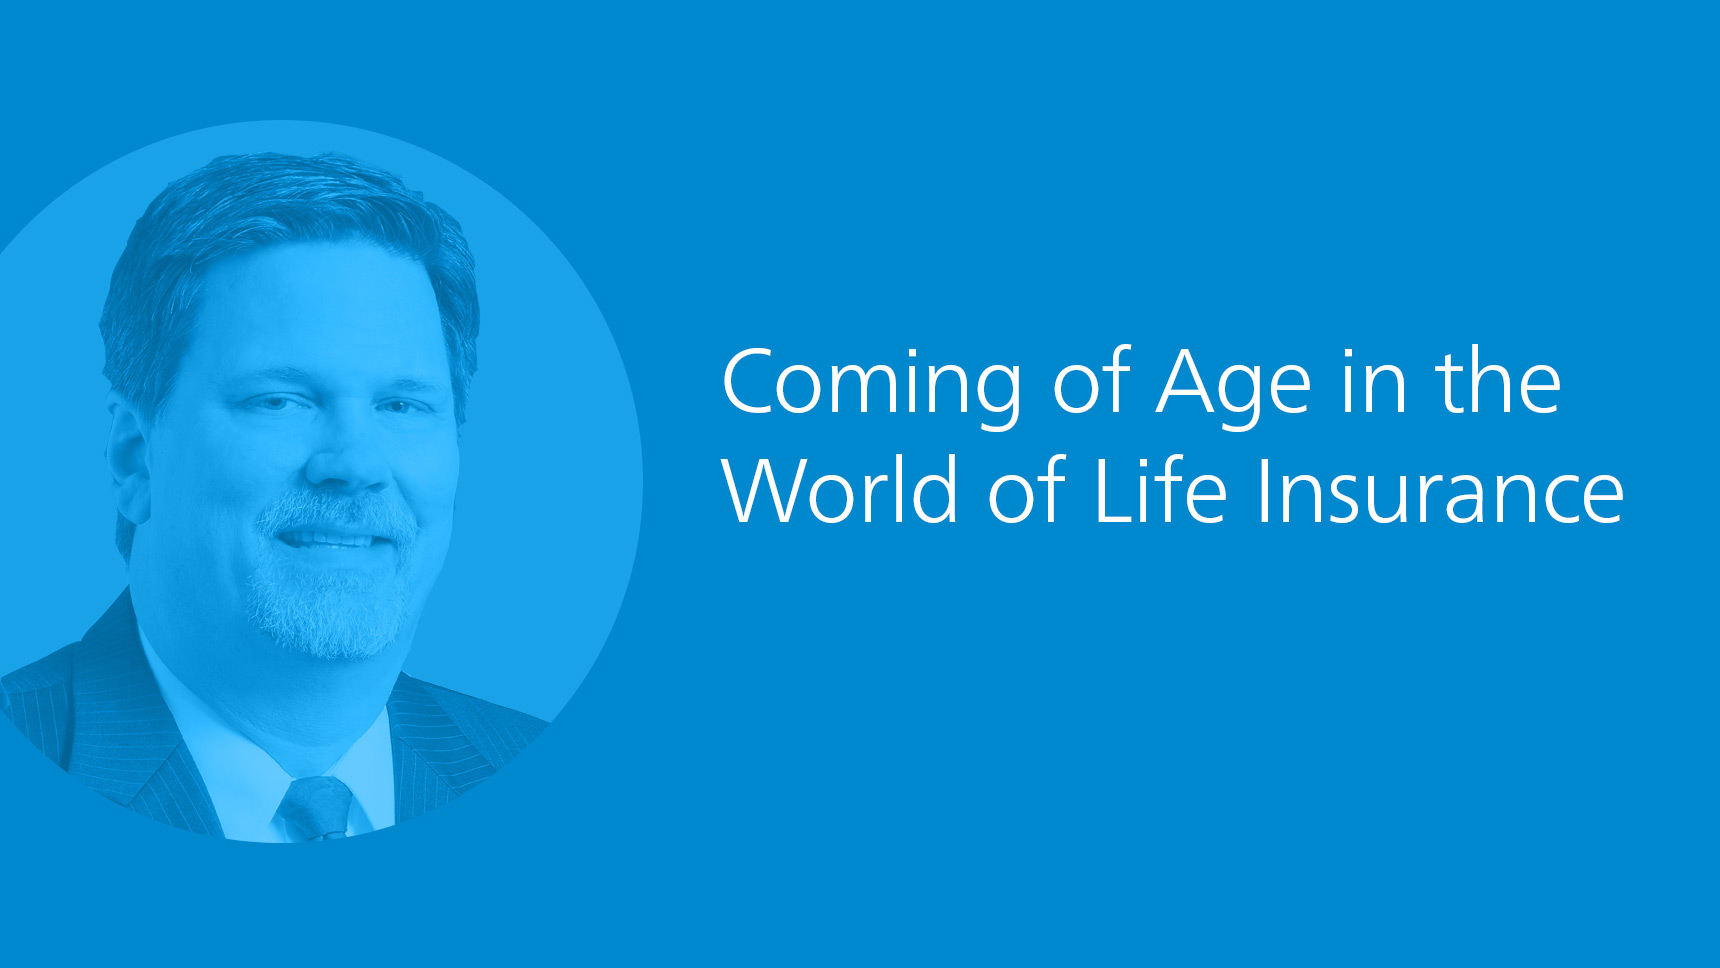 Karl Kreunen: Coming of age in the world of life insurance